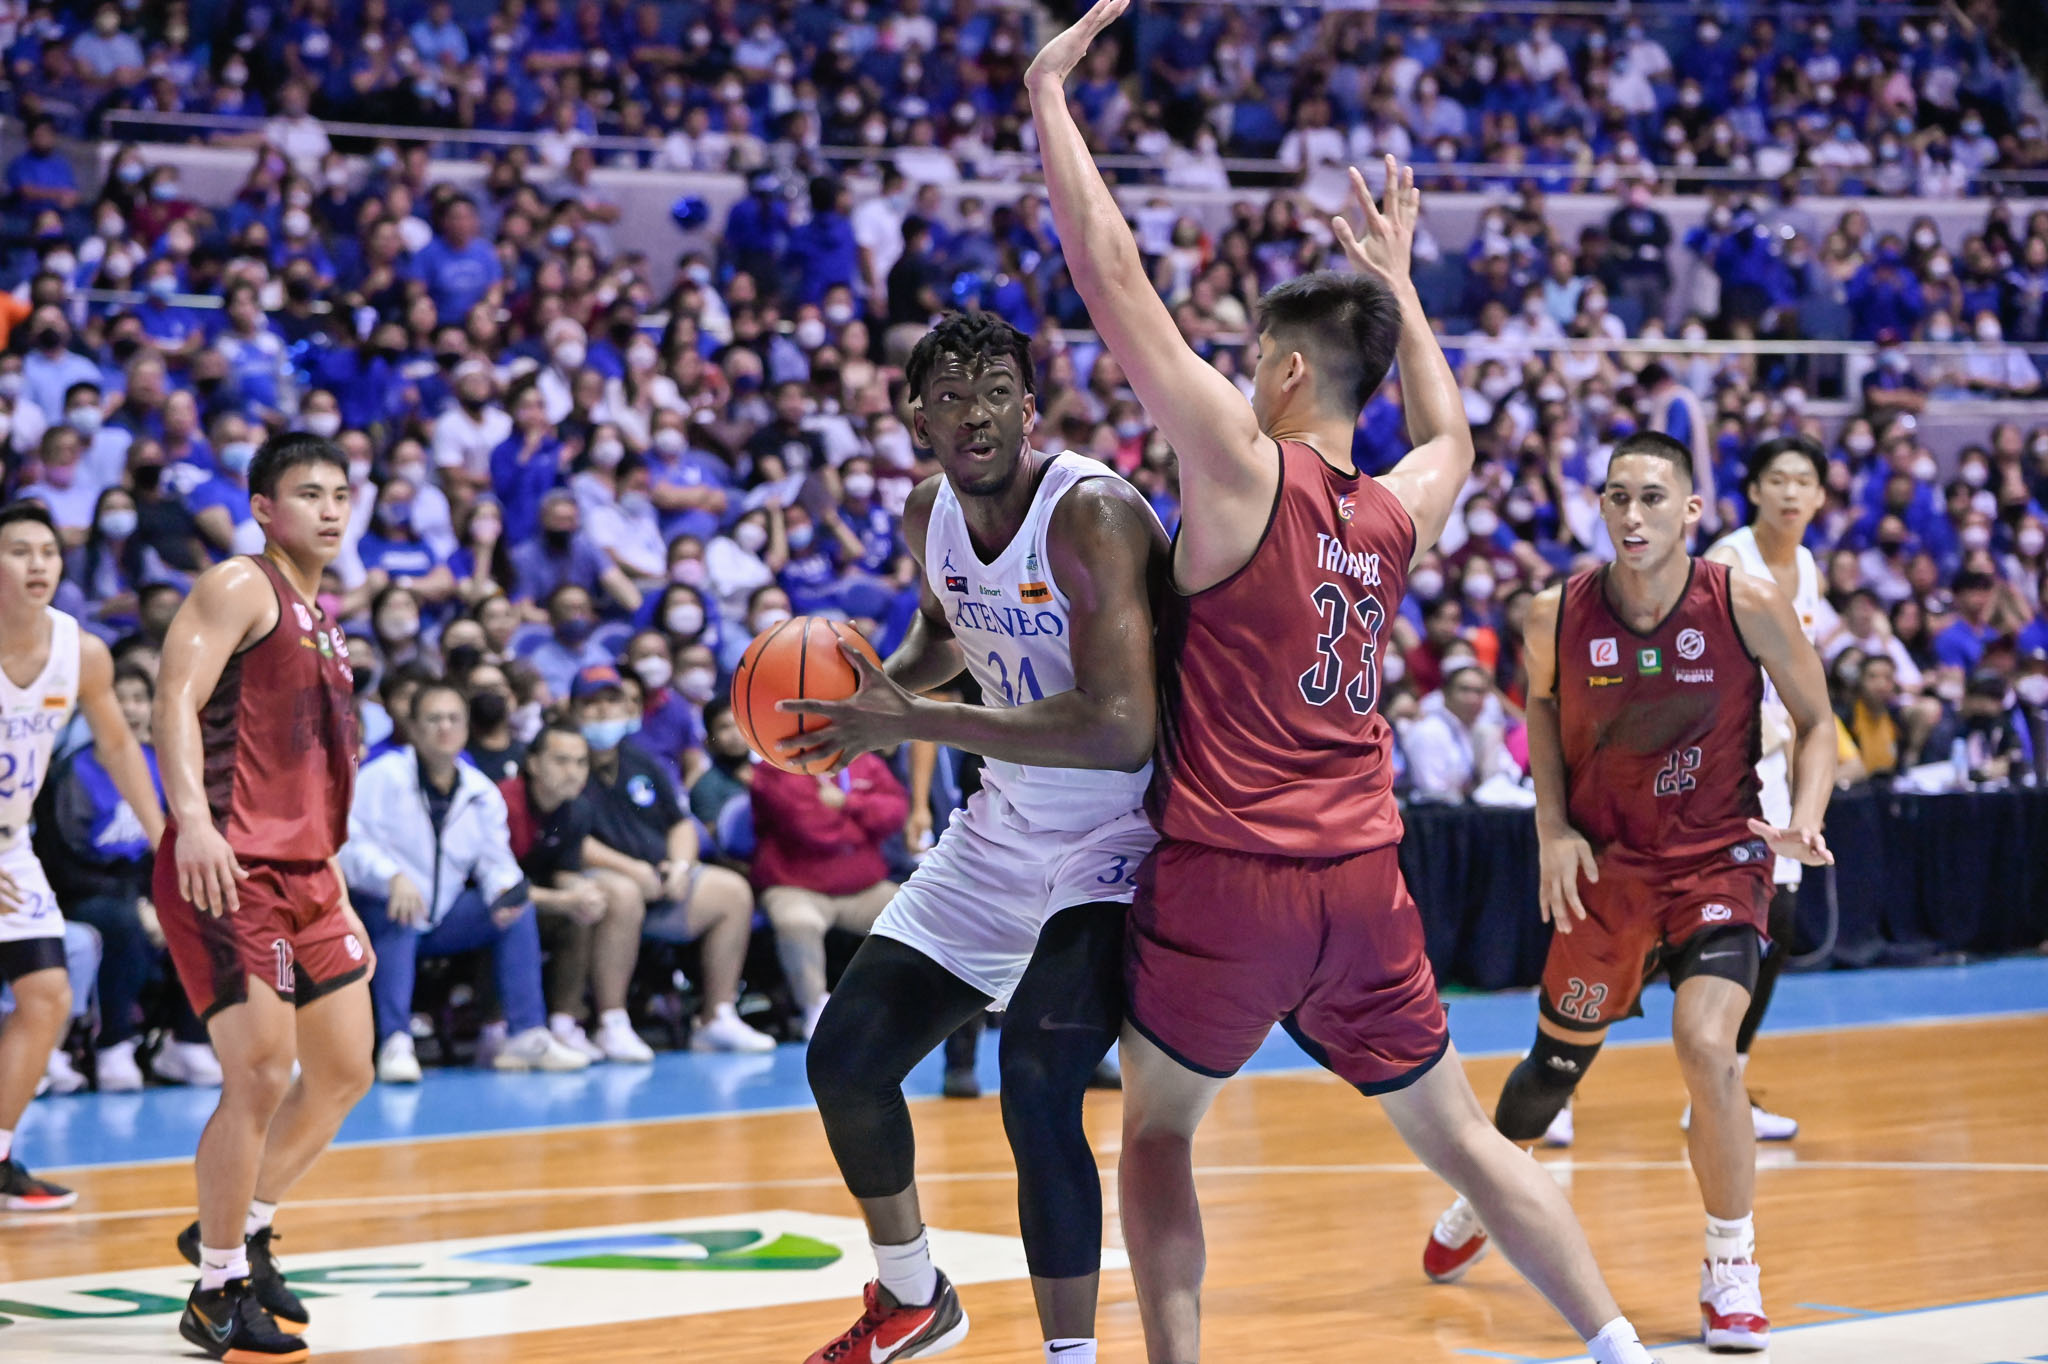 Ateneo's Ange Koaume leads Blue Eagles to Game 2 victory in the UAAP Season 85 men's basketball finals. –UAAP PHOTO